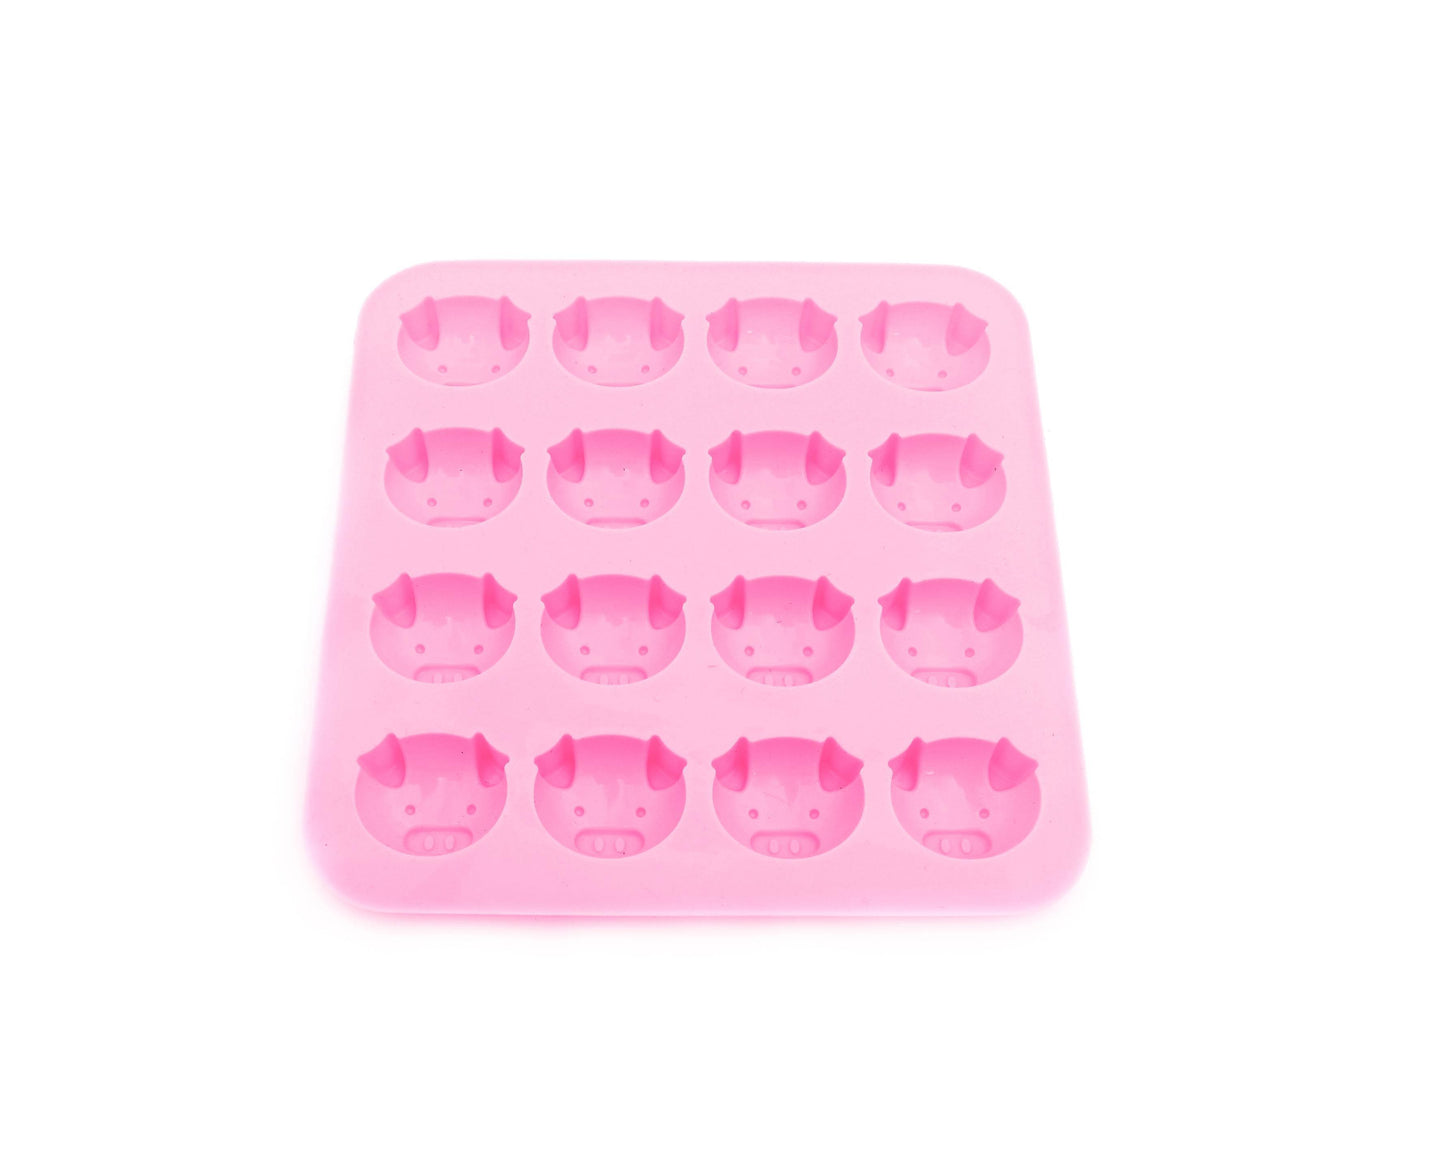 Multipurpose Silicone Mold For Baking Soap Candy Jelly Chocolate Pudding Dessert